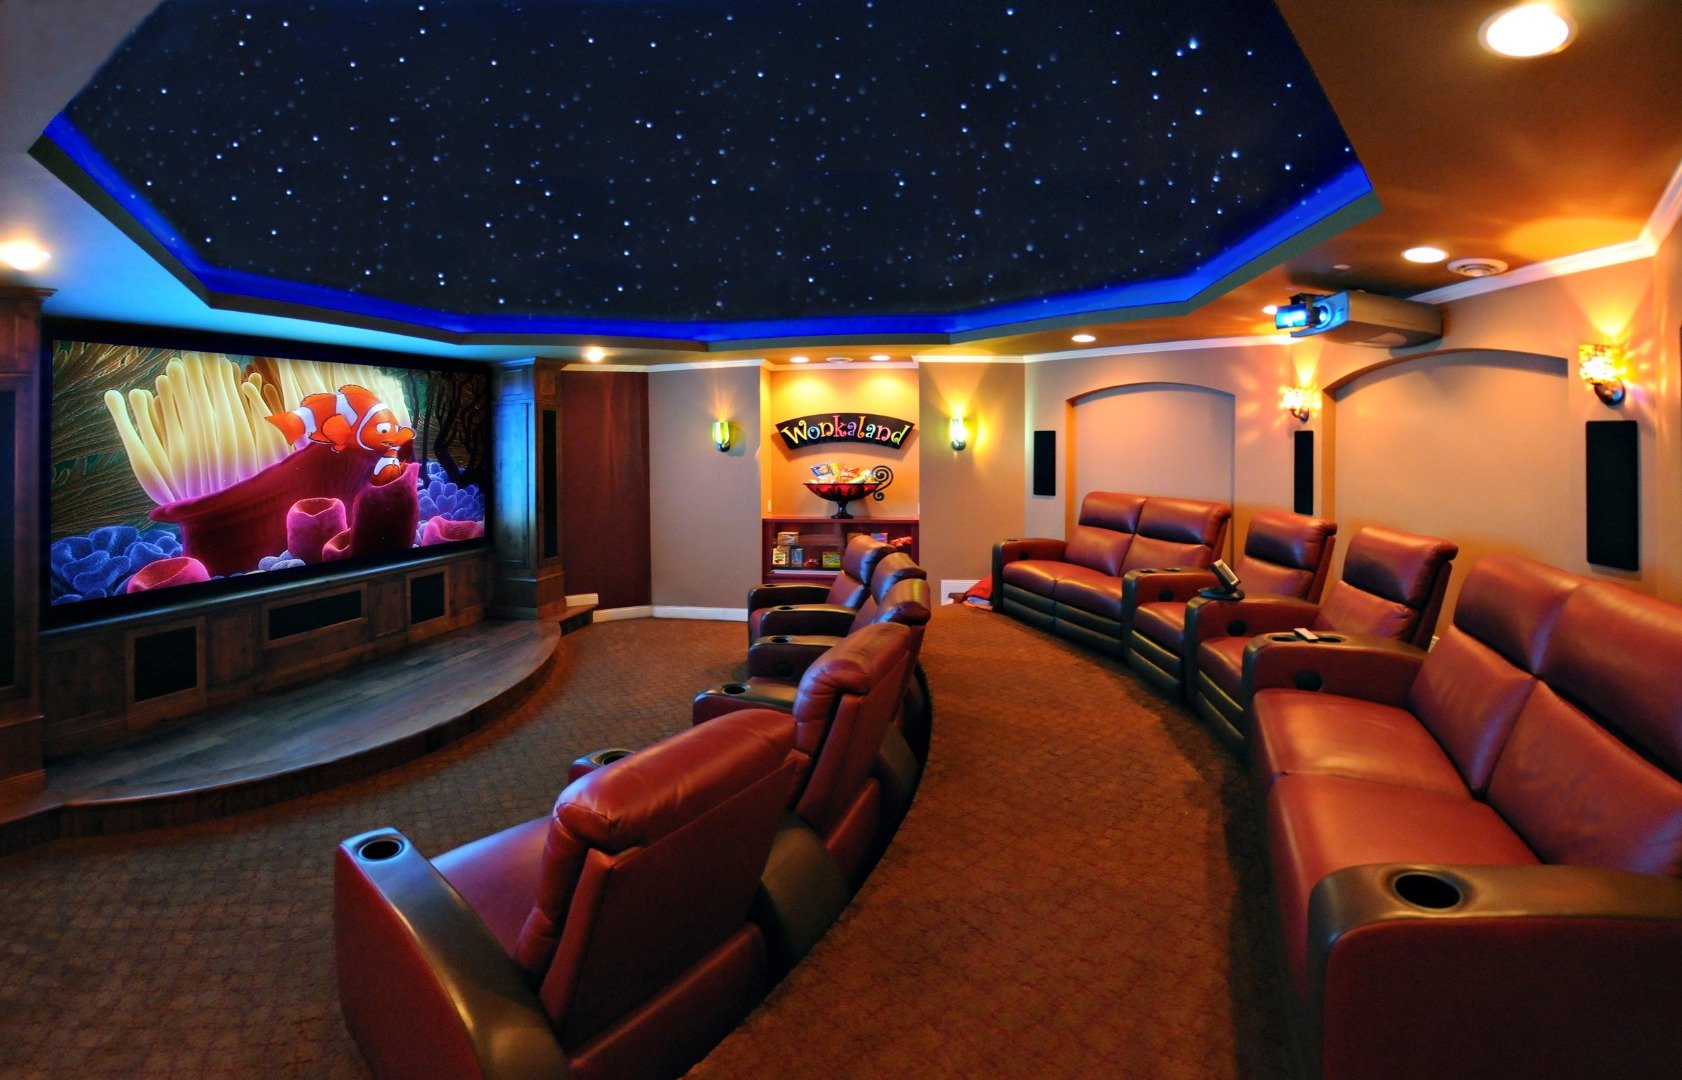 17 Home Theater Design Ideas to Make Your Movie Nights So Much Better